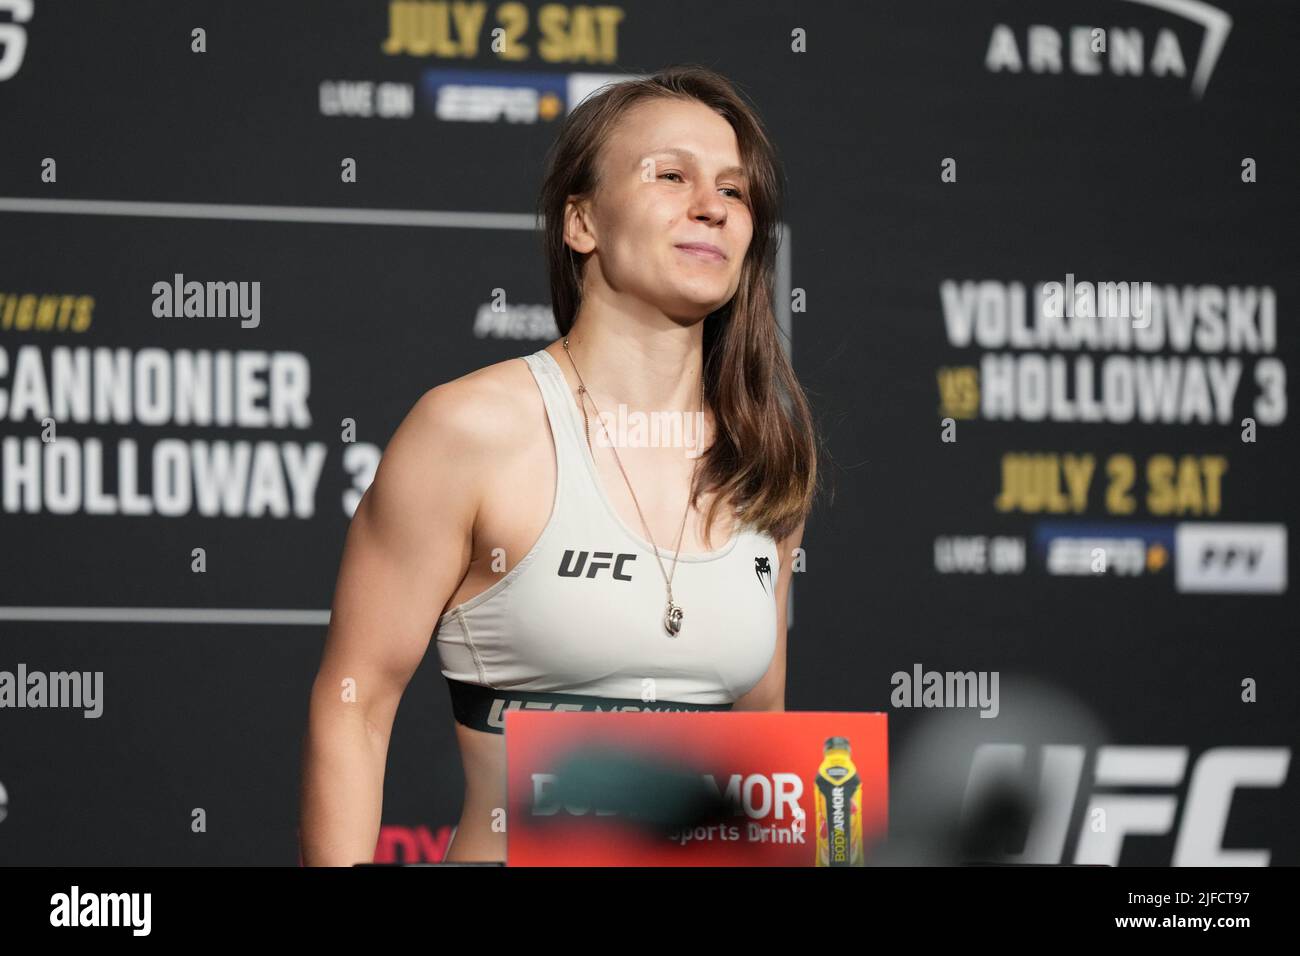 July 1, 2022, LAS VEGAS, NV, LAS VEGAS, NV, United States: LAS VEGAS, NV - June 1: Julija Stoliarenko steps on the scale for the official weigh-ins at T-Mobile Arena for UFC 276 on July 1, 2022 in LAS VEGAS, NV, United States. (Credit Image: © Louis Grasse/PX Imagens via ZUMA Press Wire) Stock Photo